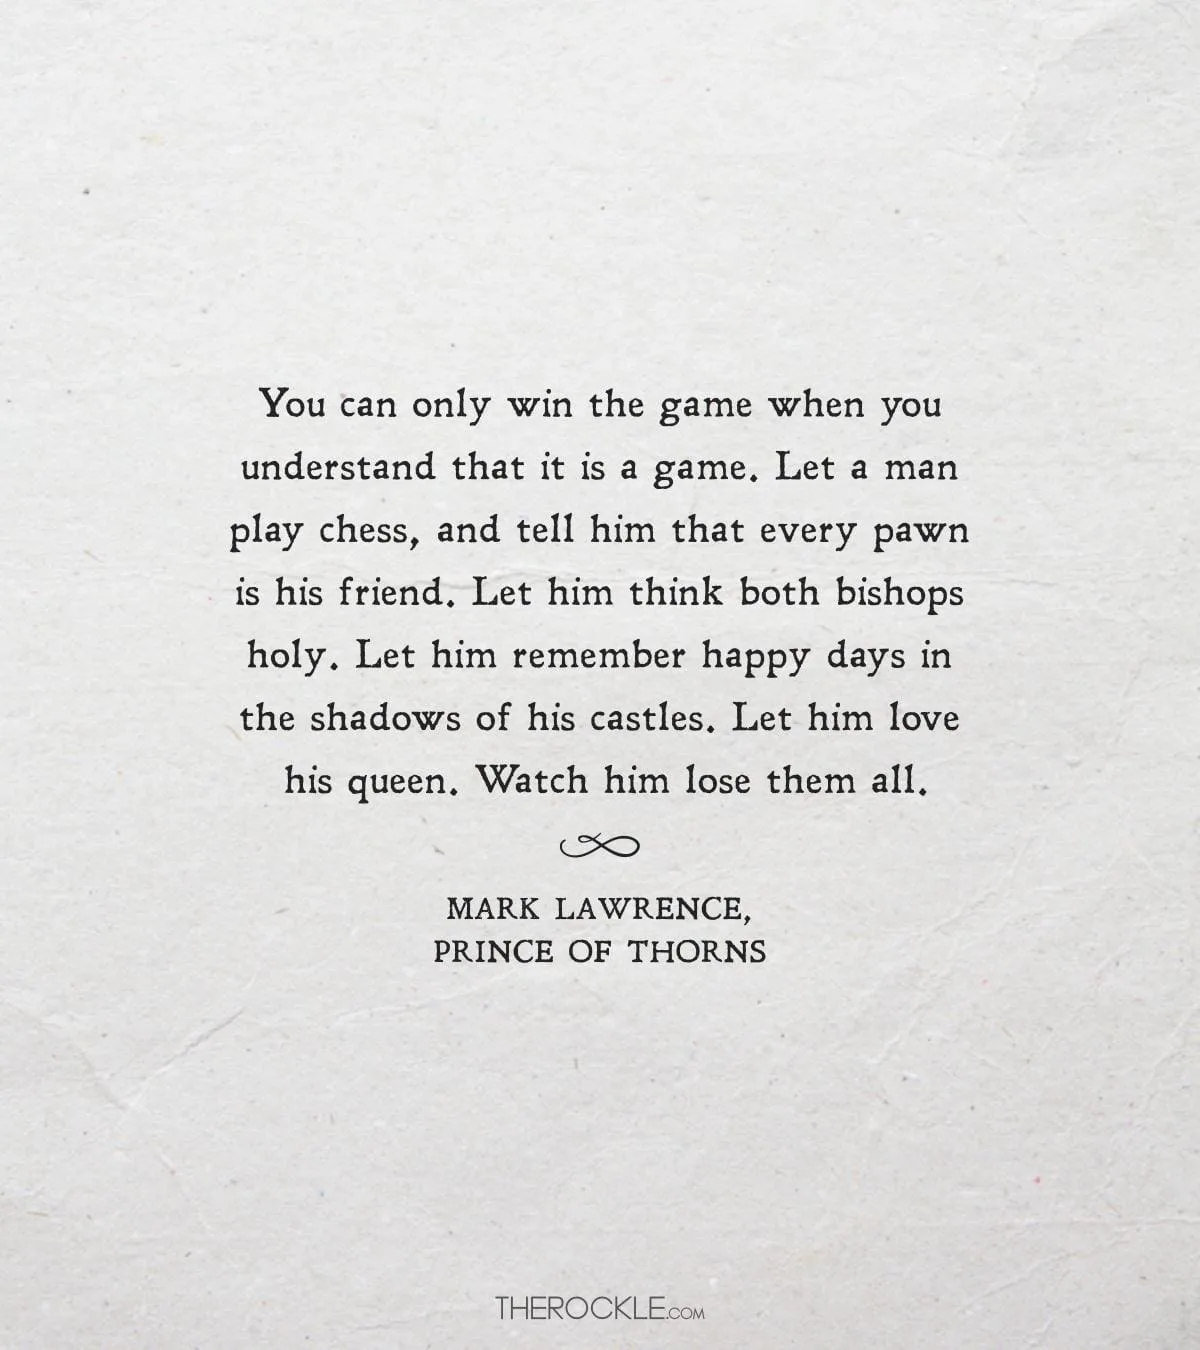 Mark Lawrence quote about how life is a game